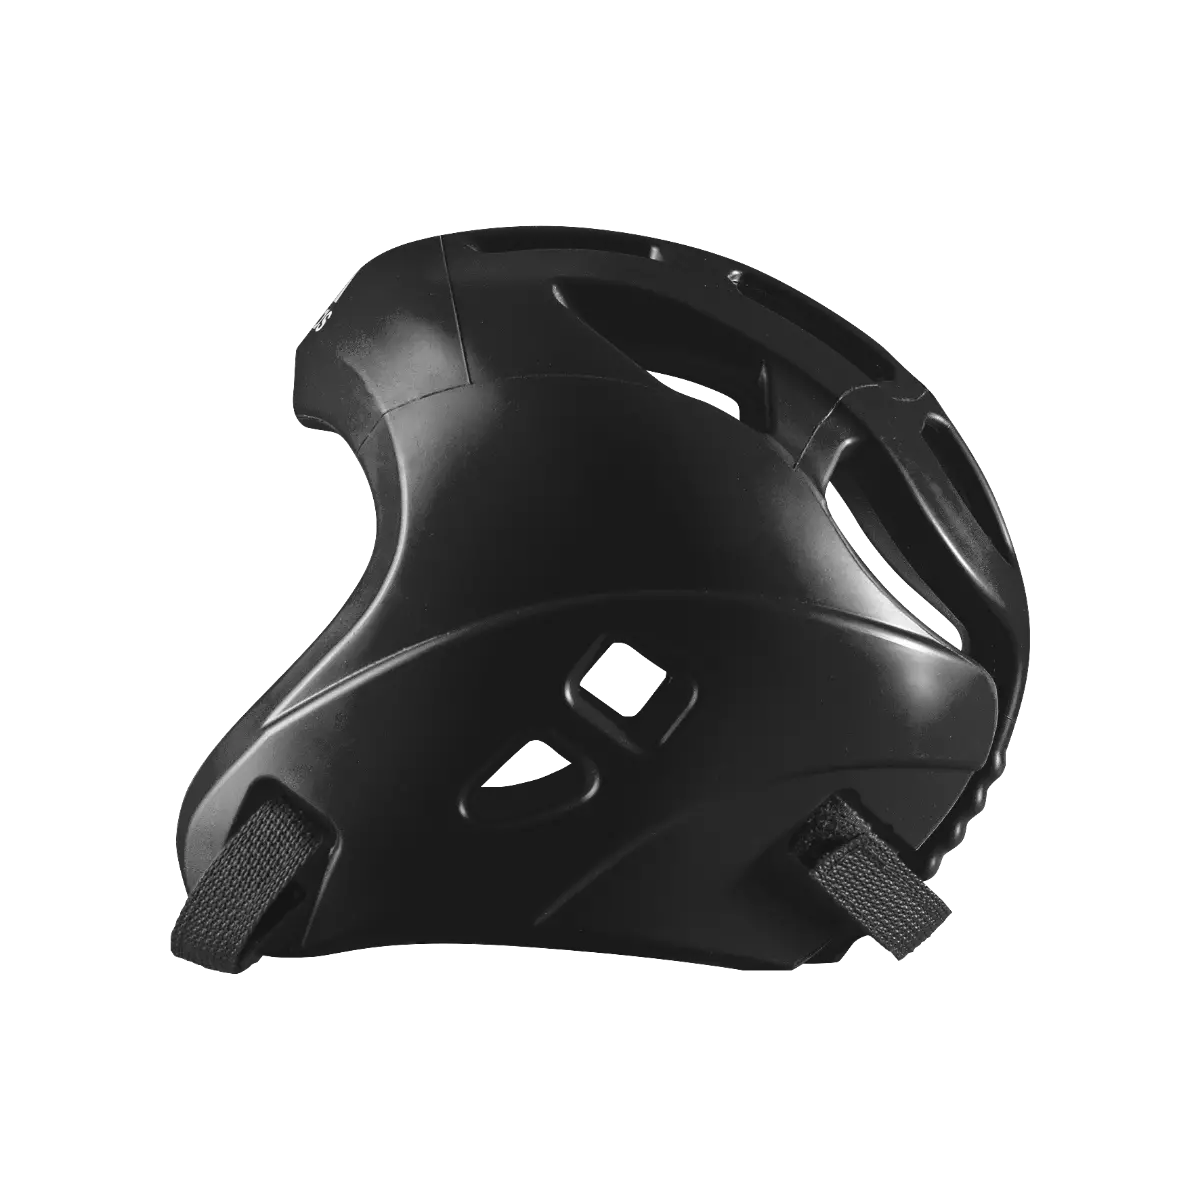 adidas WAKO Approved Kickboxing Head Guard Open Face